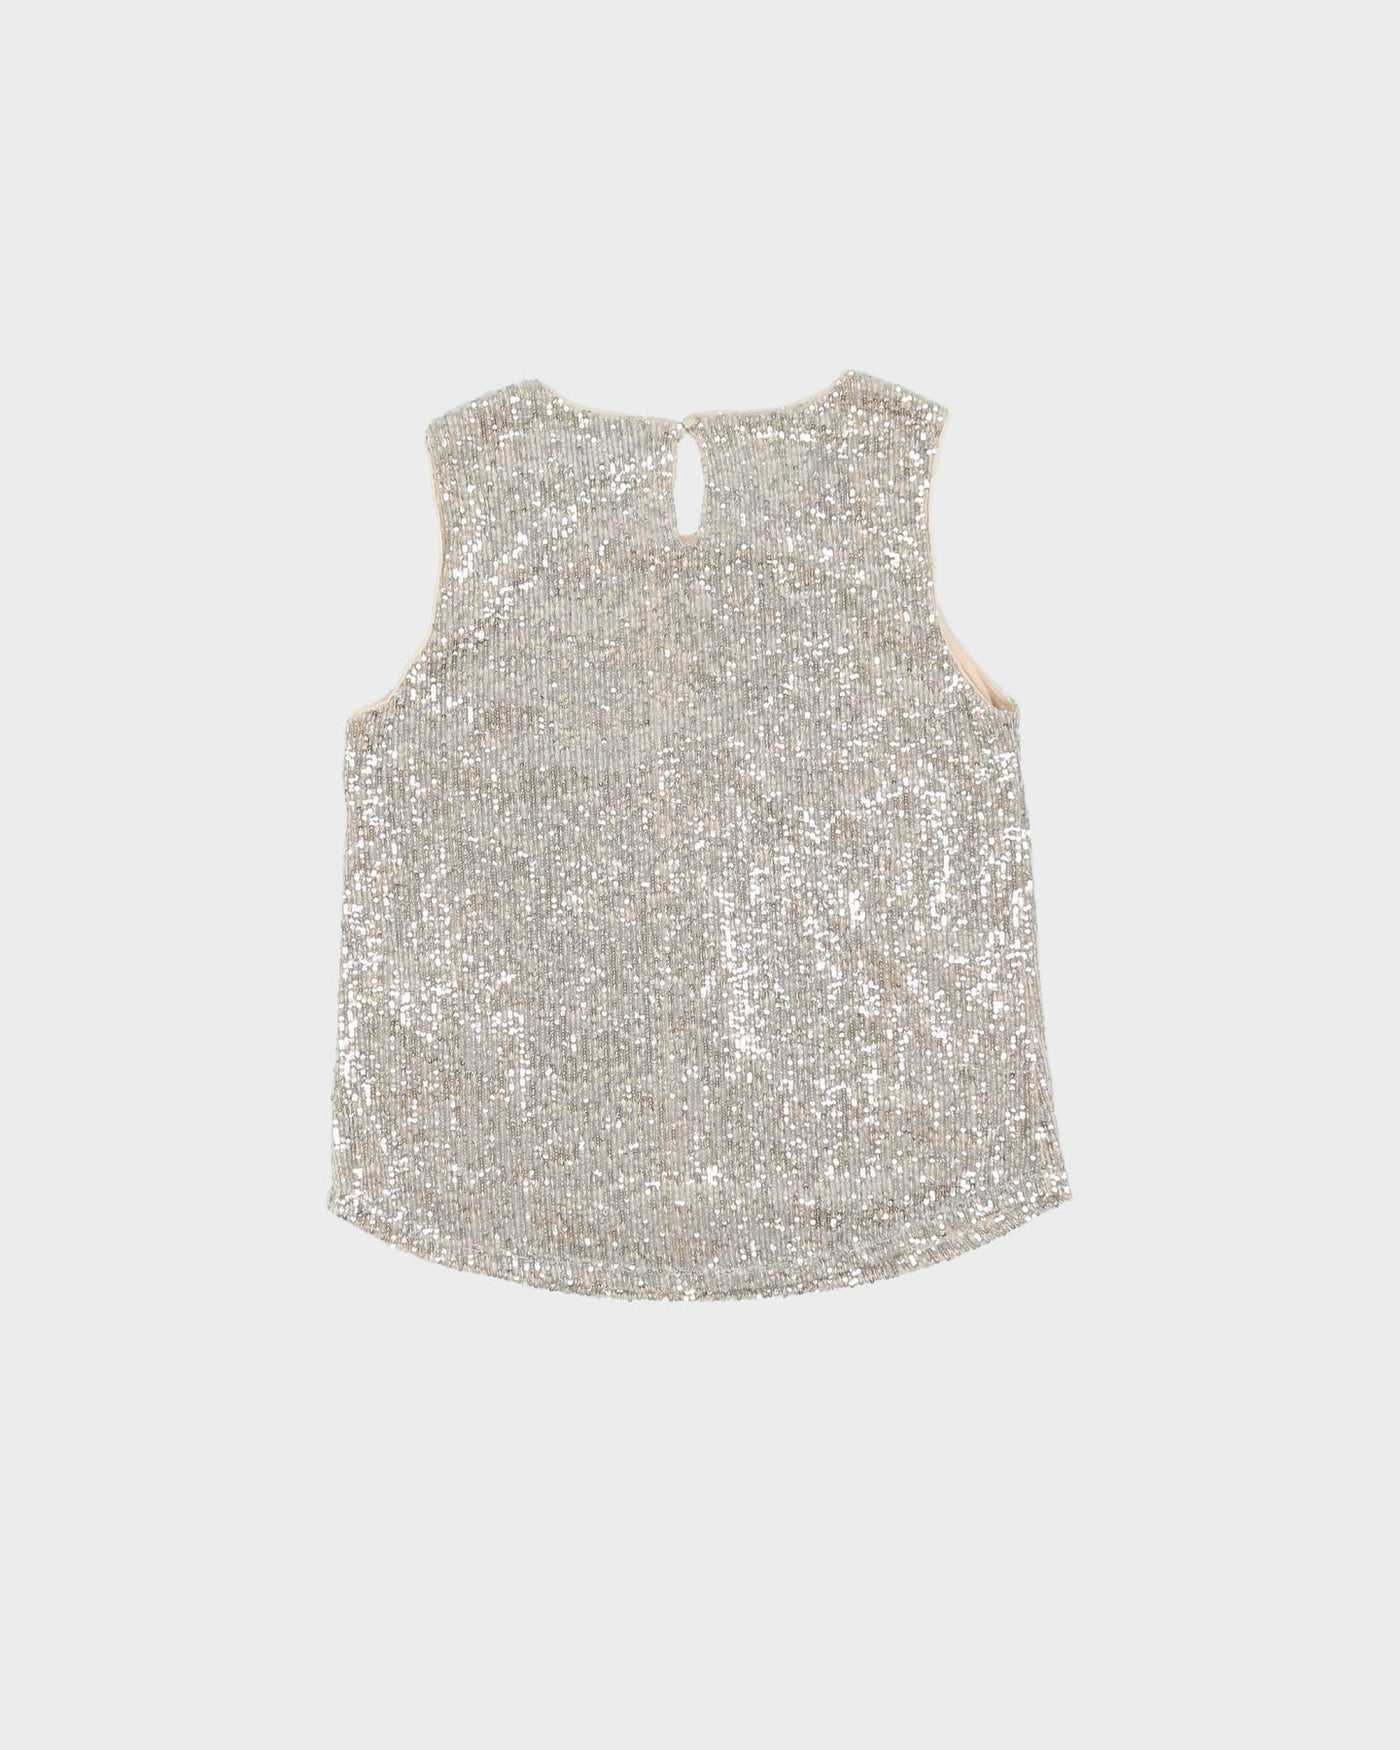 DKNY Beige Silver Sequin Sleeveless Blouse - S